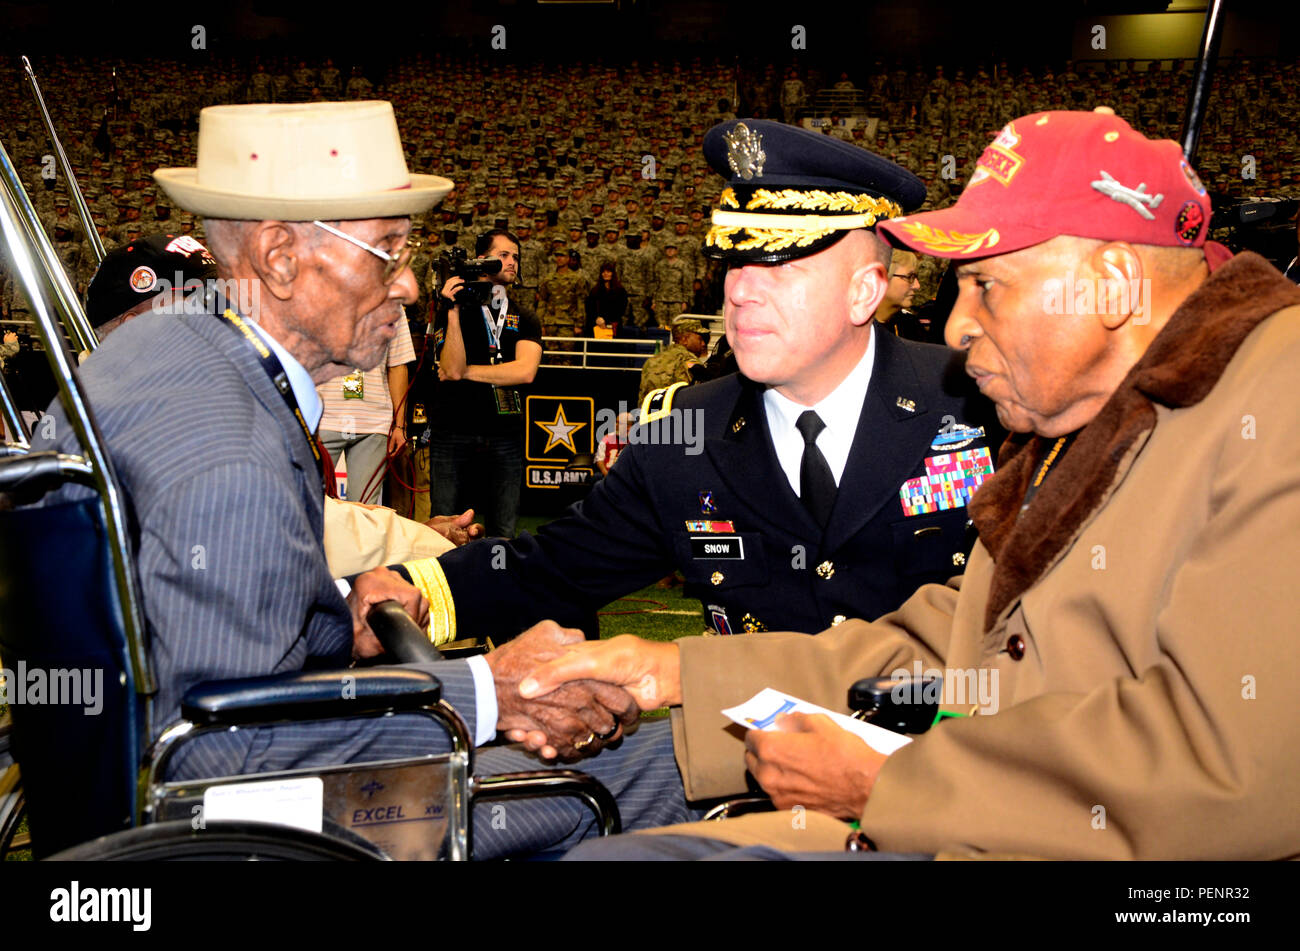 Richard Overton (left), America’s oldest veteran at 109 years old, greets Dr. Granville Coggs (right), a Tuskegee Airmen, and Maj. Gen. Jeffery Snow (center), commanding general of U.S. Army Recruiting Command, during the pre-game ceremonies of the 2016 U.S. Army All-American Bowl, Jan. 9. Overton delivered the game ball for the bowl, while Coggs was introduced to crowd with fellow Tuskegee Airmen Theodore Johnson during opening ceremonies. The AAB showcases the top 90 high school football players in the Nation, along with 125 top high school marching band and color guard. Stock Photo